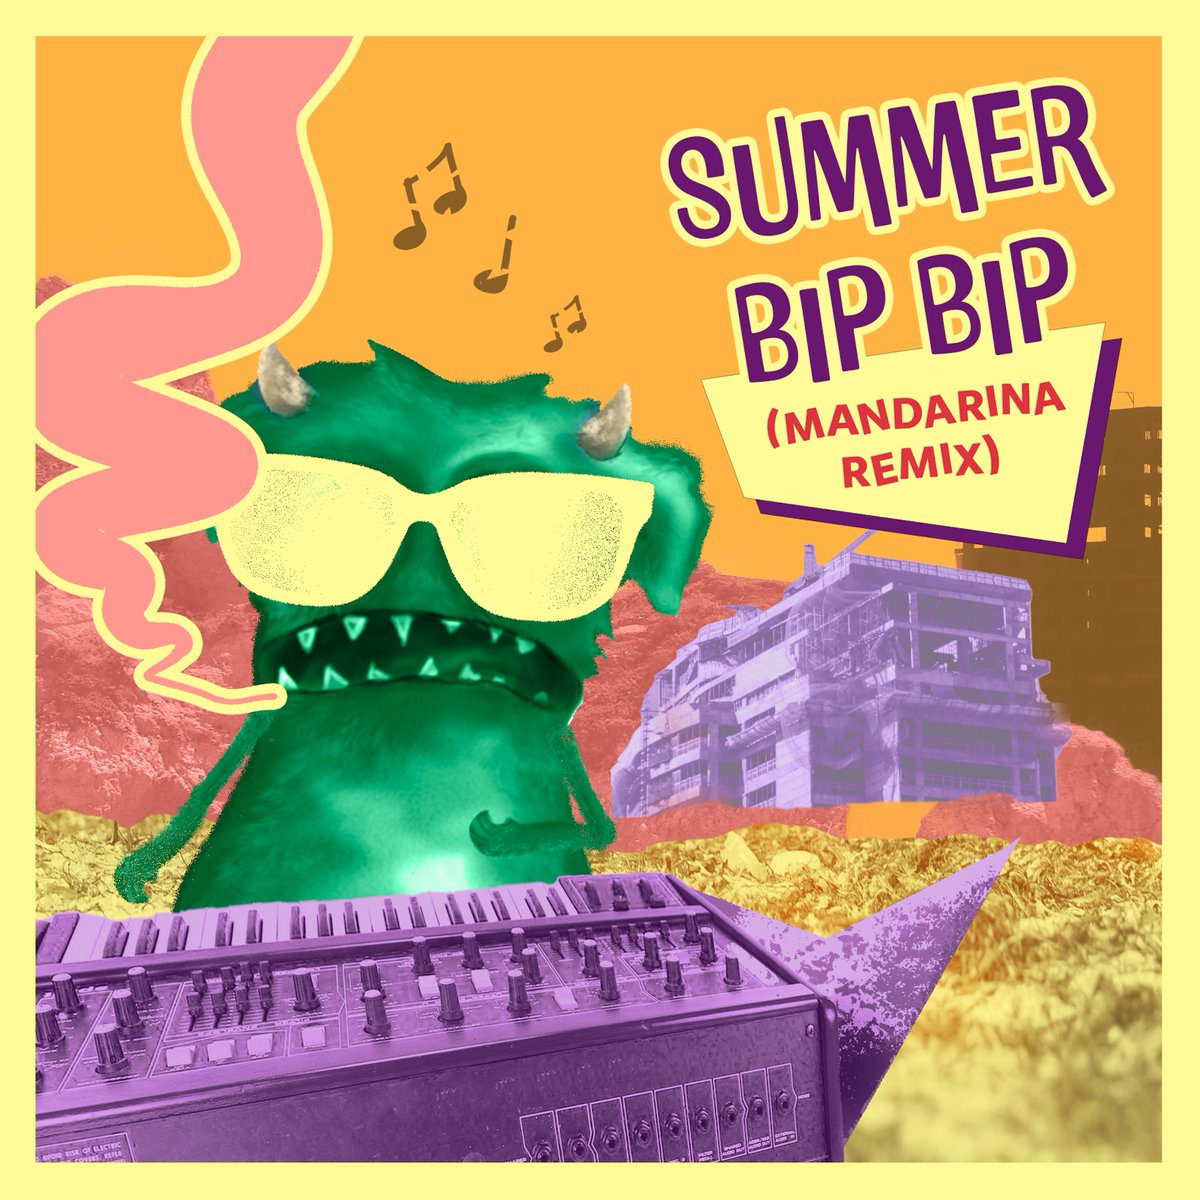 “Summer Bip Bip” isn’t coming alone on June 23rd: you’ll also get the chance to discover a remix by Mandarina 🍊 Really happy with what we did for this first ever collaboration, stay tuned. ➡️ Listen to Mandarina : linktr.ee/mandarina.music ➡️ Pre-save: idol-io.ffm.to/summerbipbip